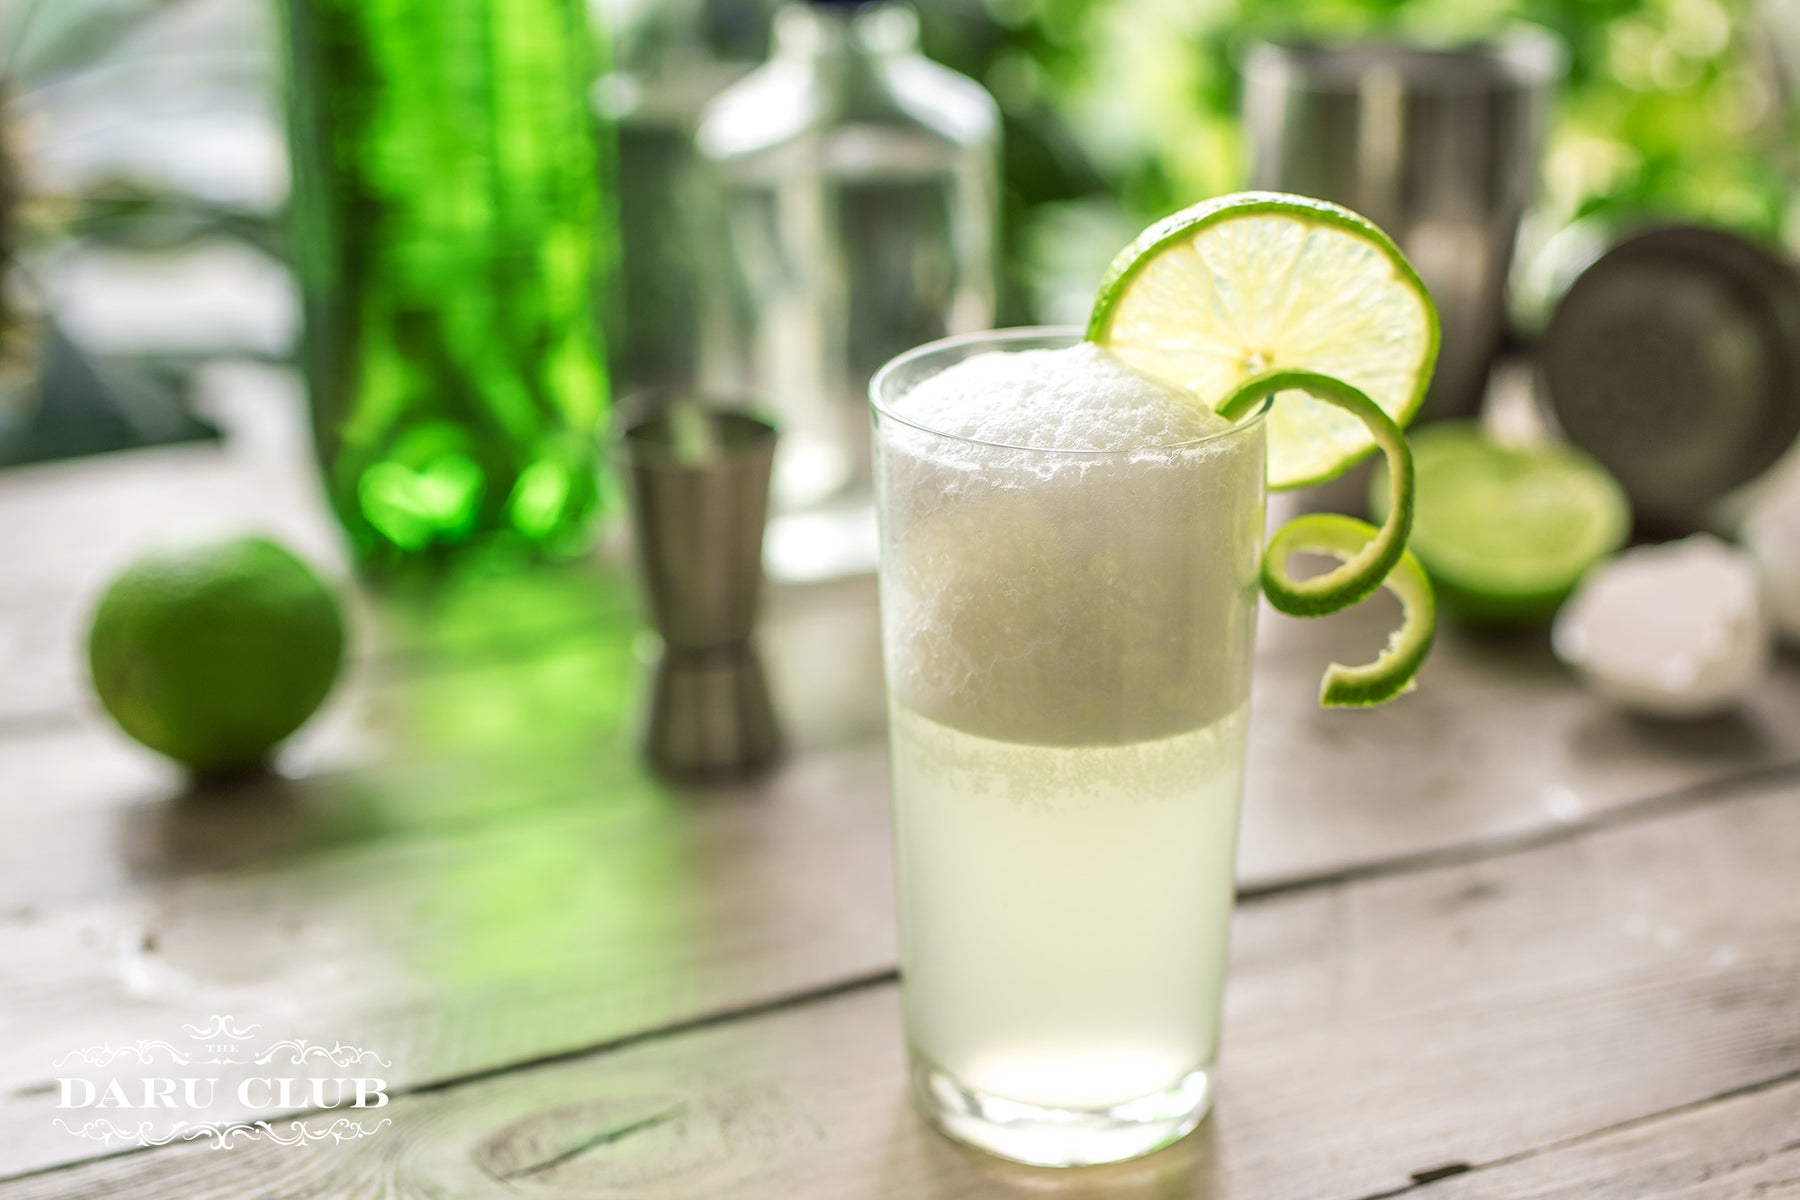 Gin Fizz Cocktail Recipe - get busy with the fizzy